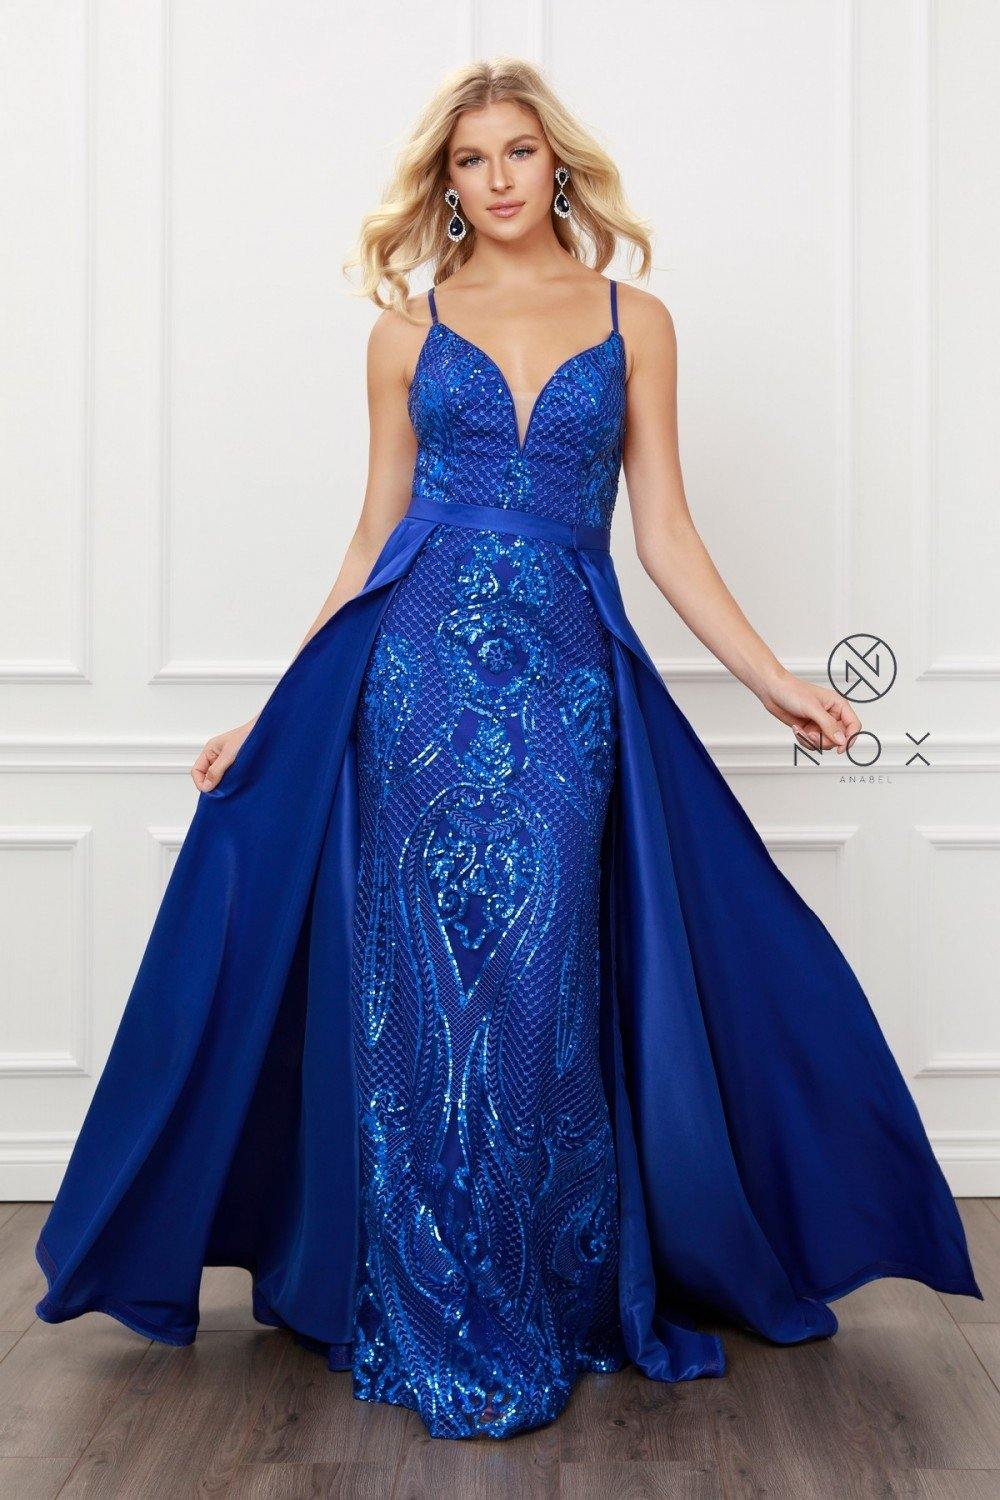 Long Prom Dress Formal Ball Gown - The Dress Outlet